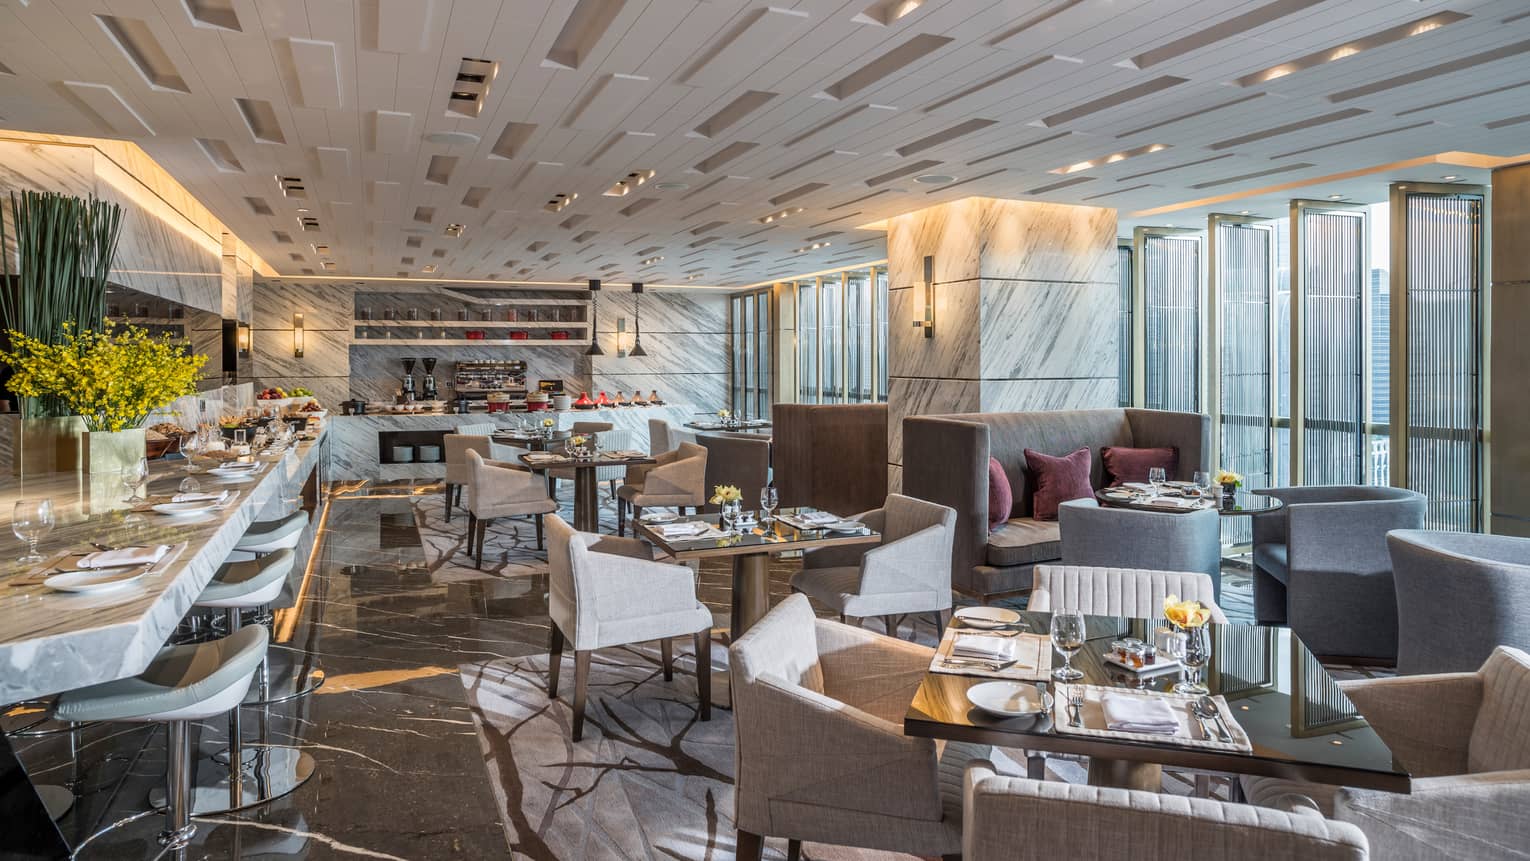 Executive Club Lounge modern dining room with decorative white ceilings, marble bar 